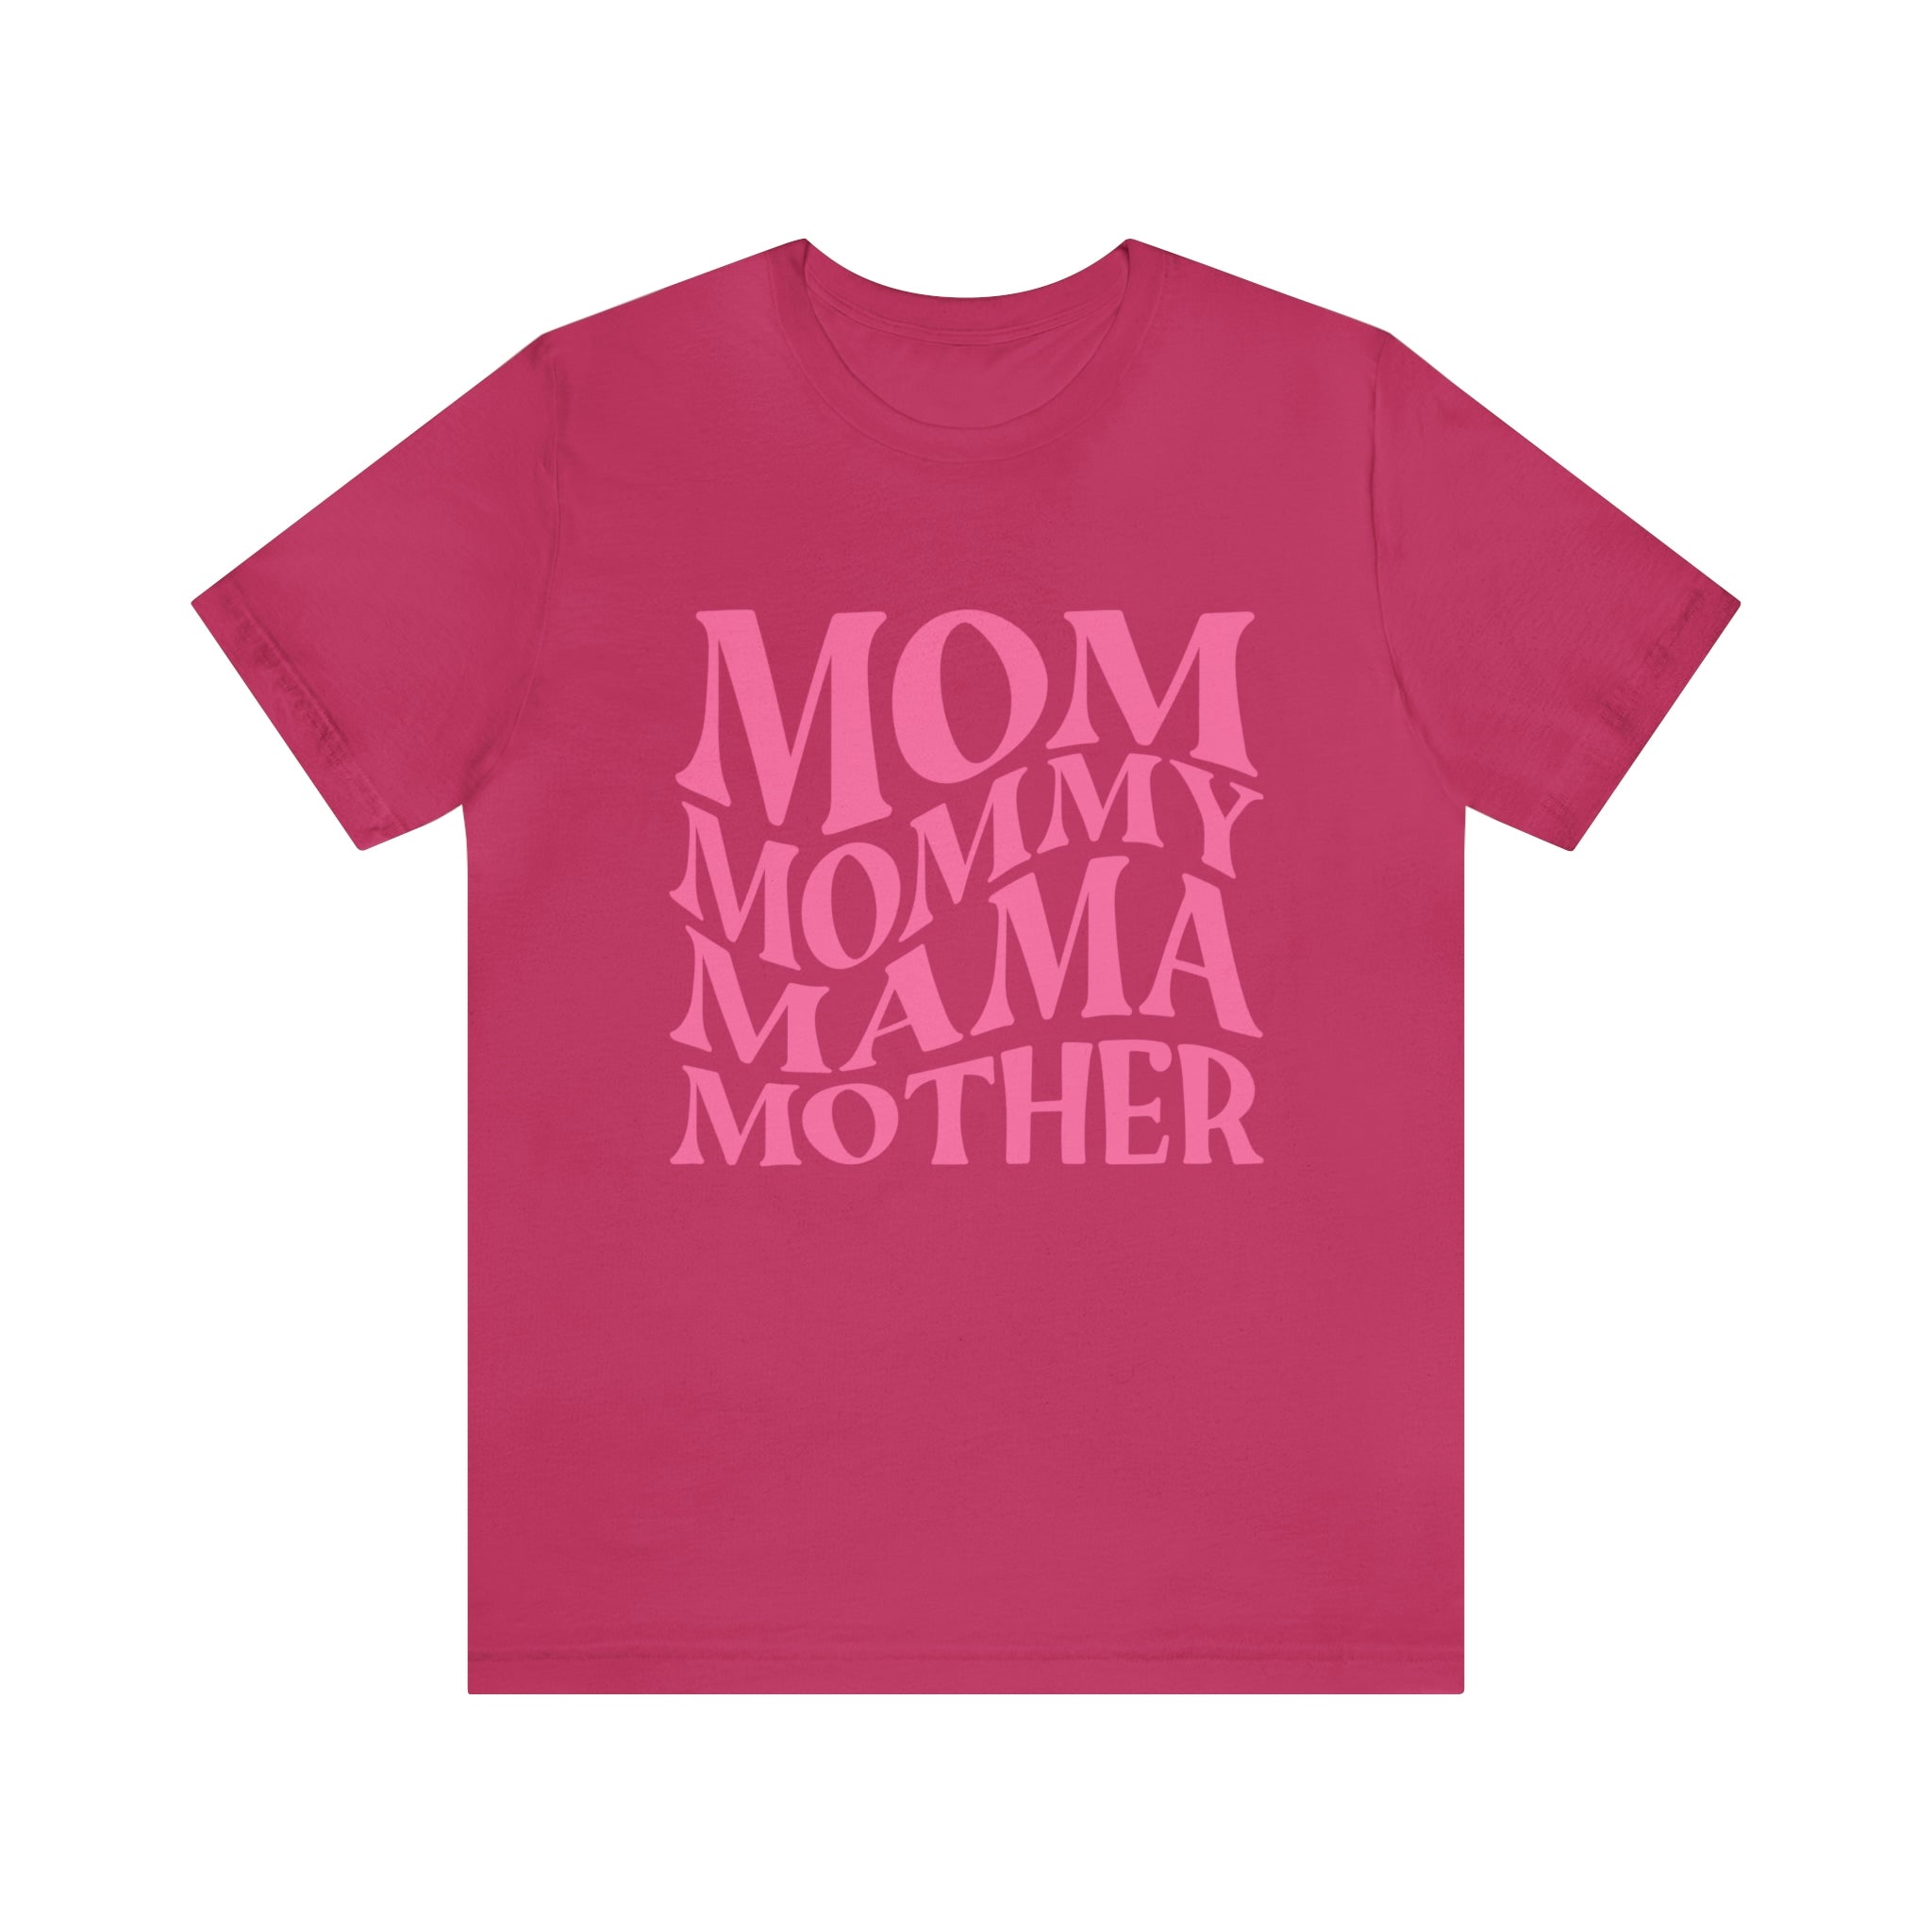 Mom, Mommy, Mama, Mother Women T-shirt